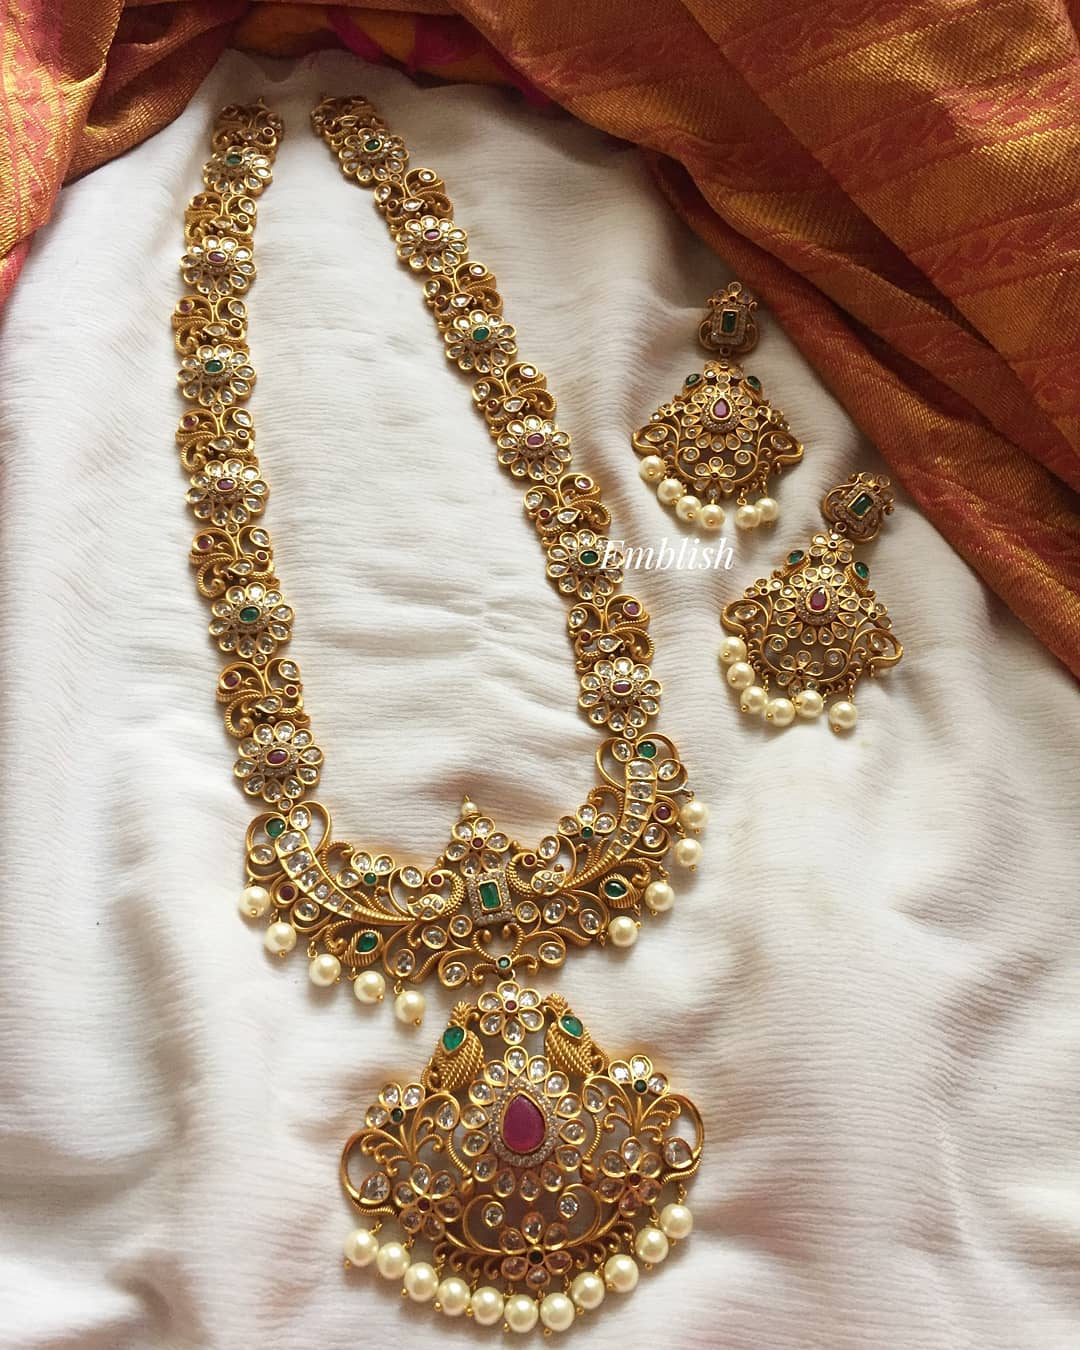 Grand Long Necklace From Emblish Coimbatore